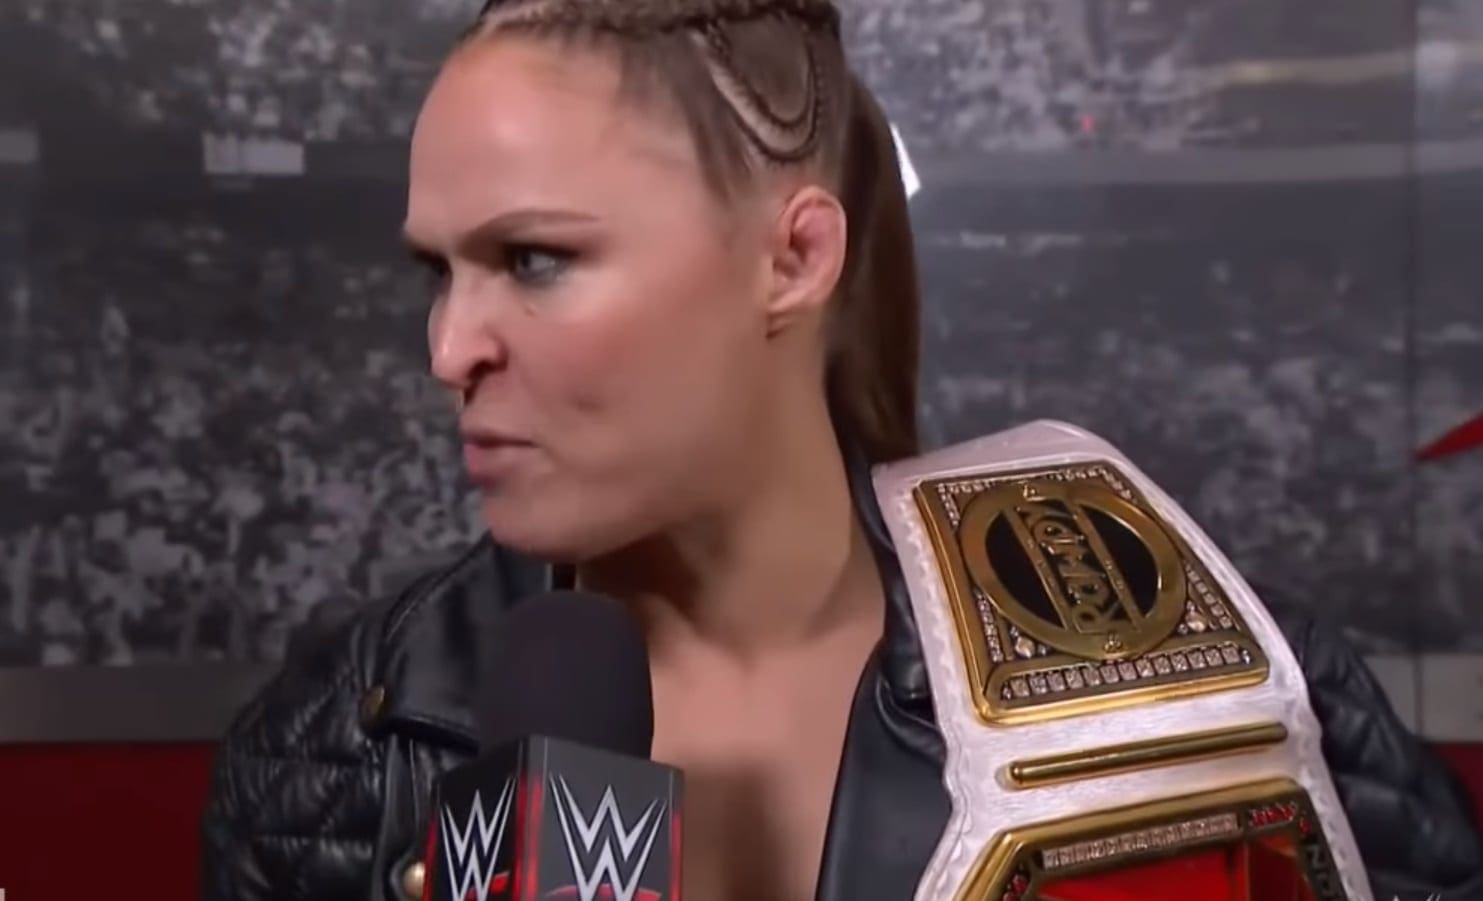 Ronda Rousey Forgot To Bring Her Women’s Title To WWE RAW This Week